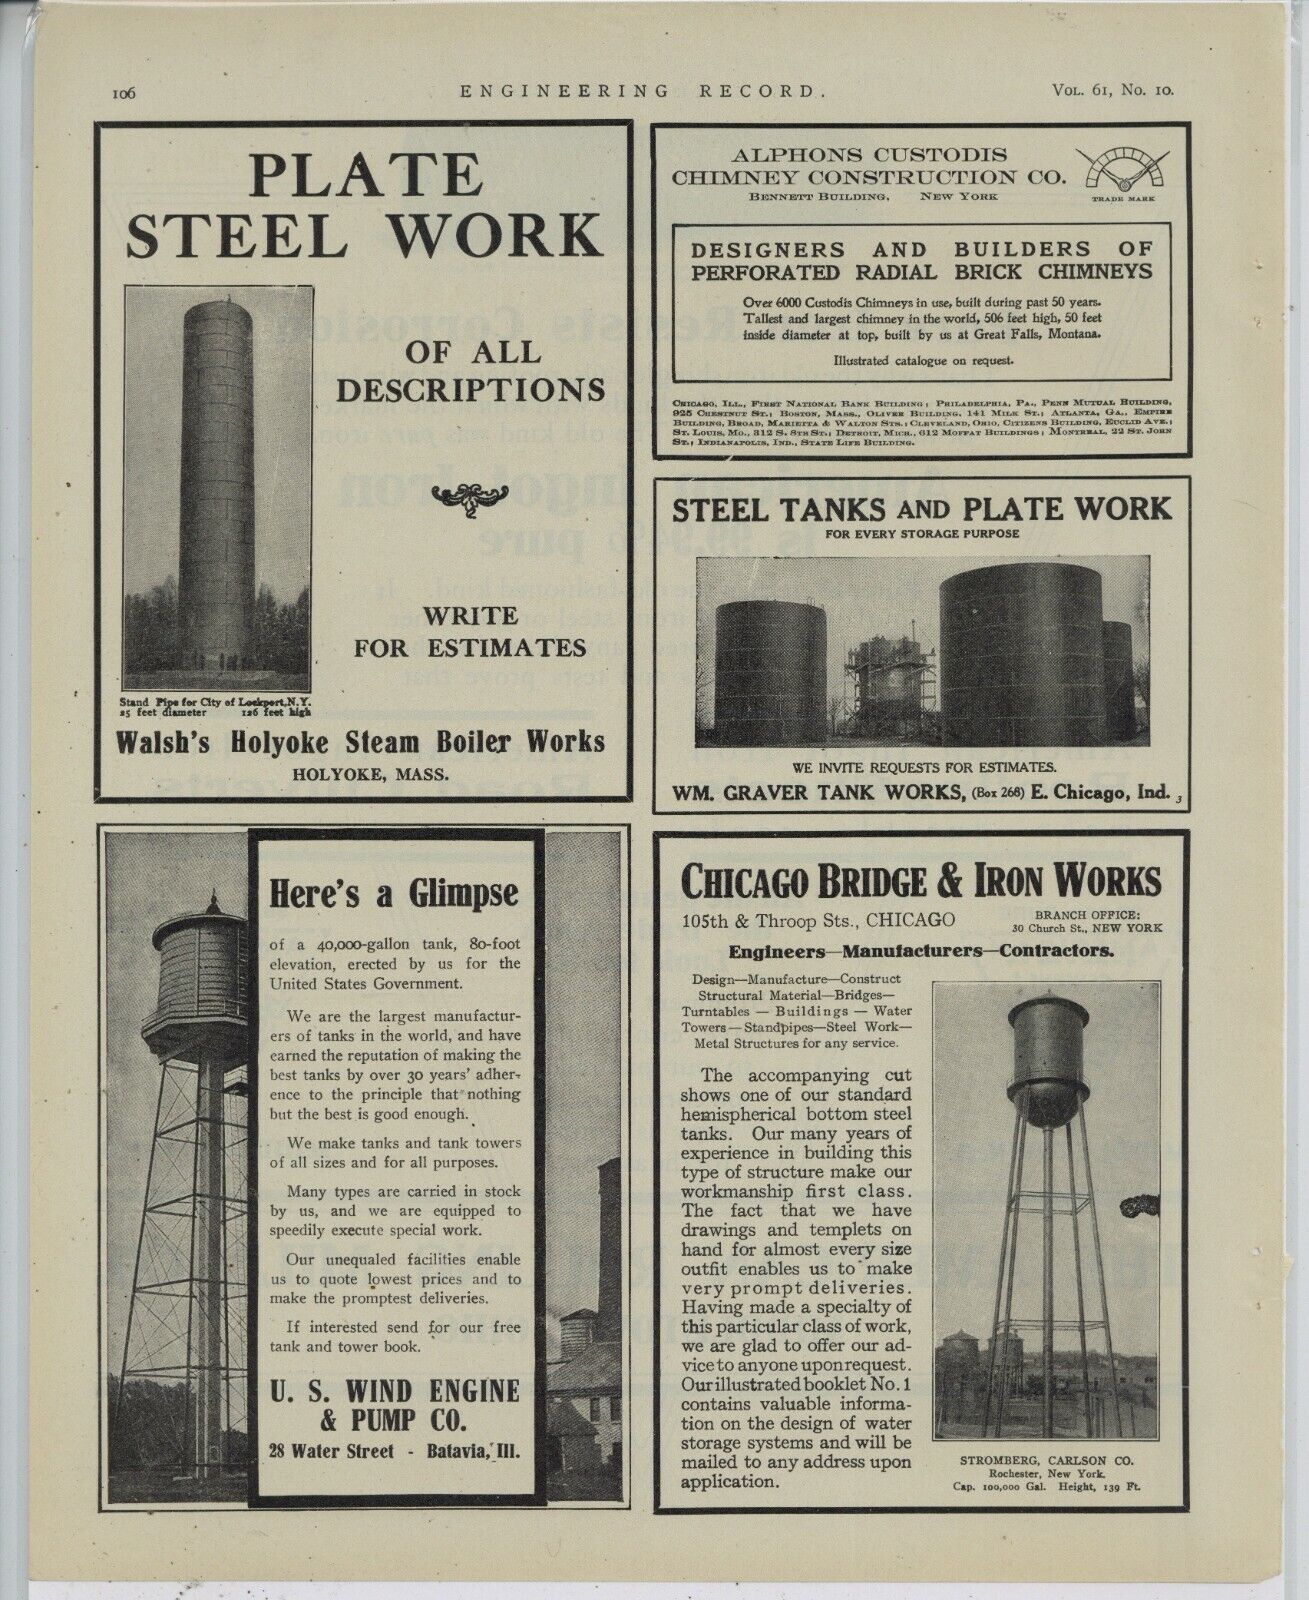 1910 Chicago Bridge & Iron Works Ad: Stromberg Carlson Water Tower, Rochester NY